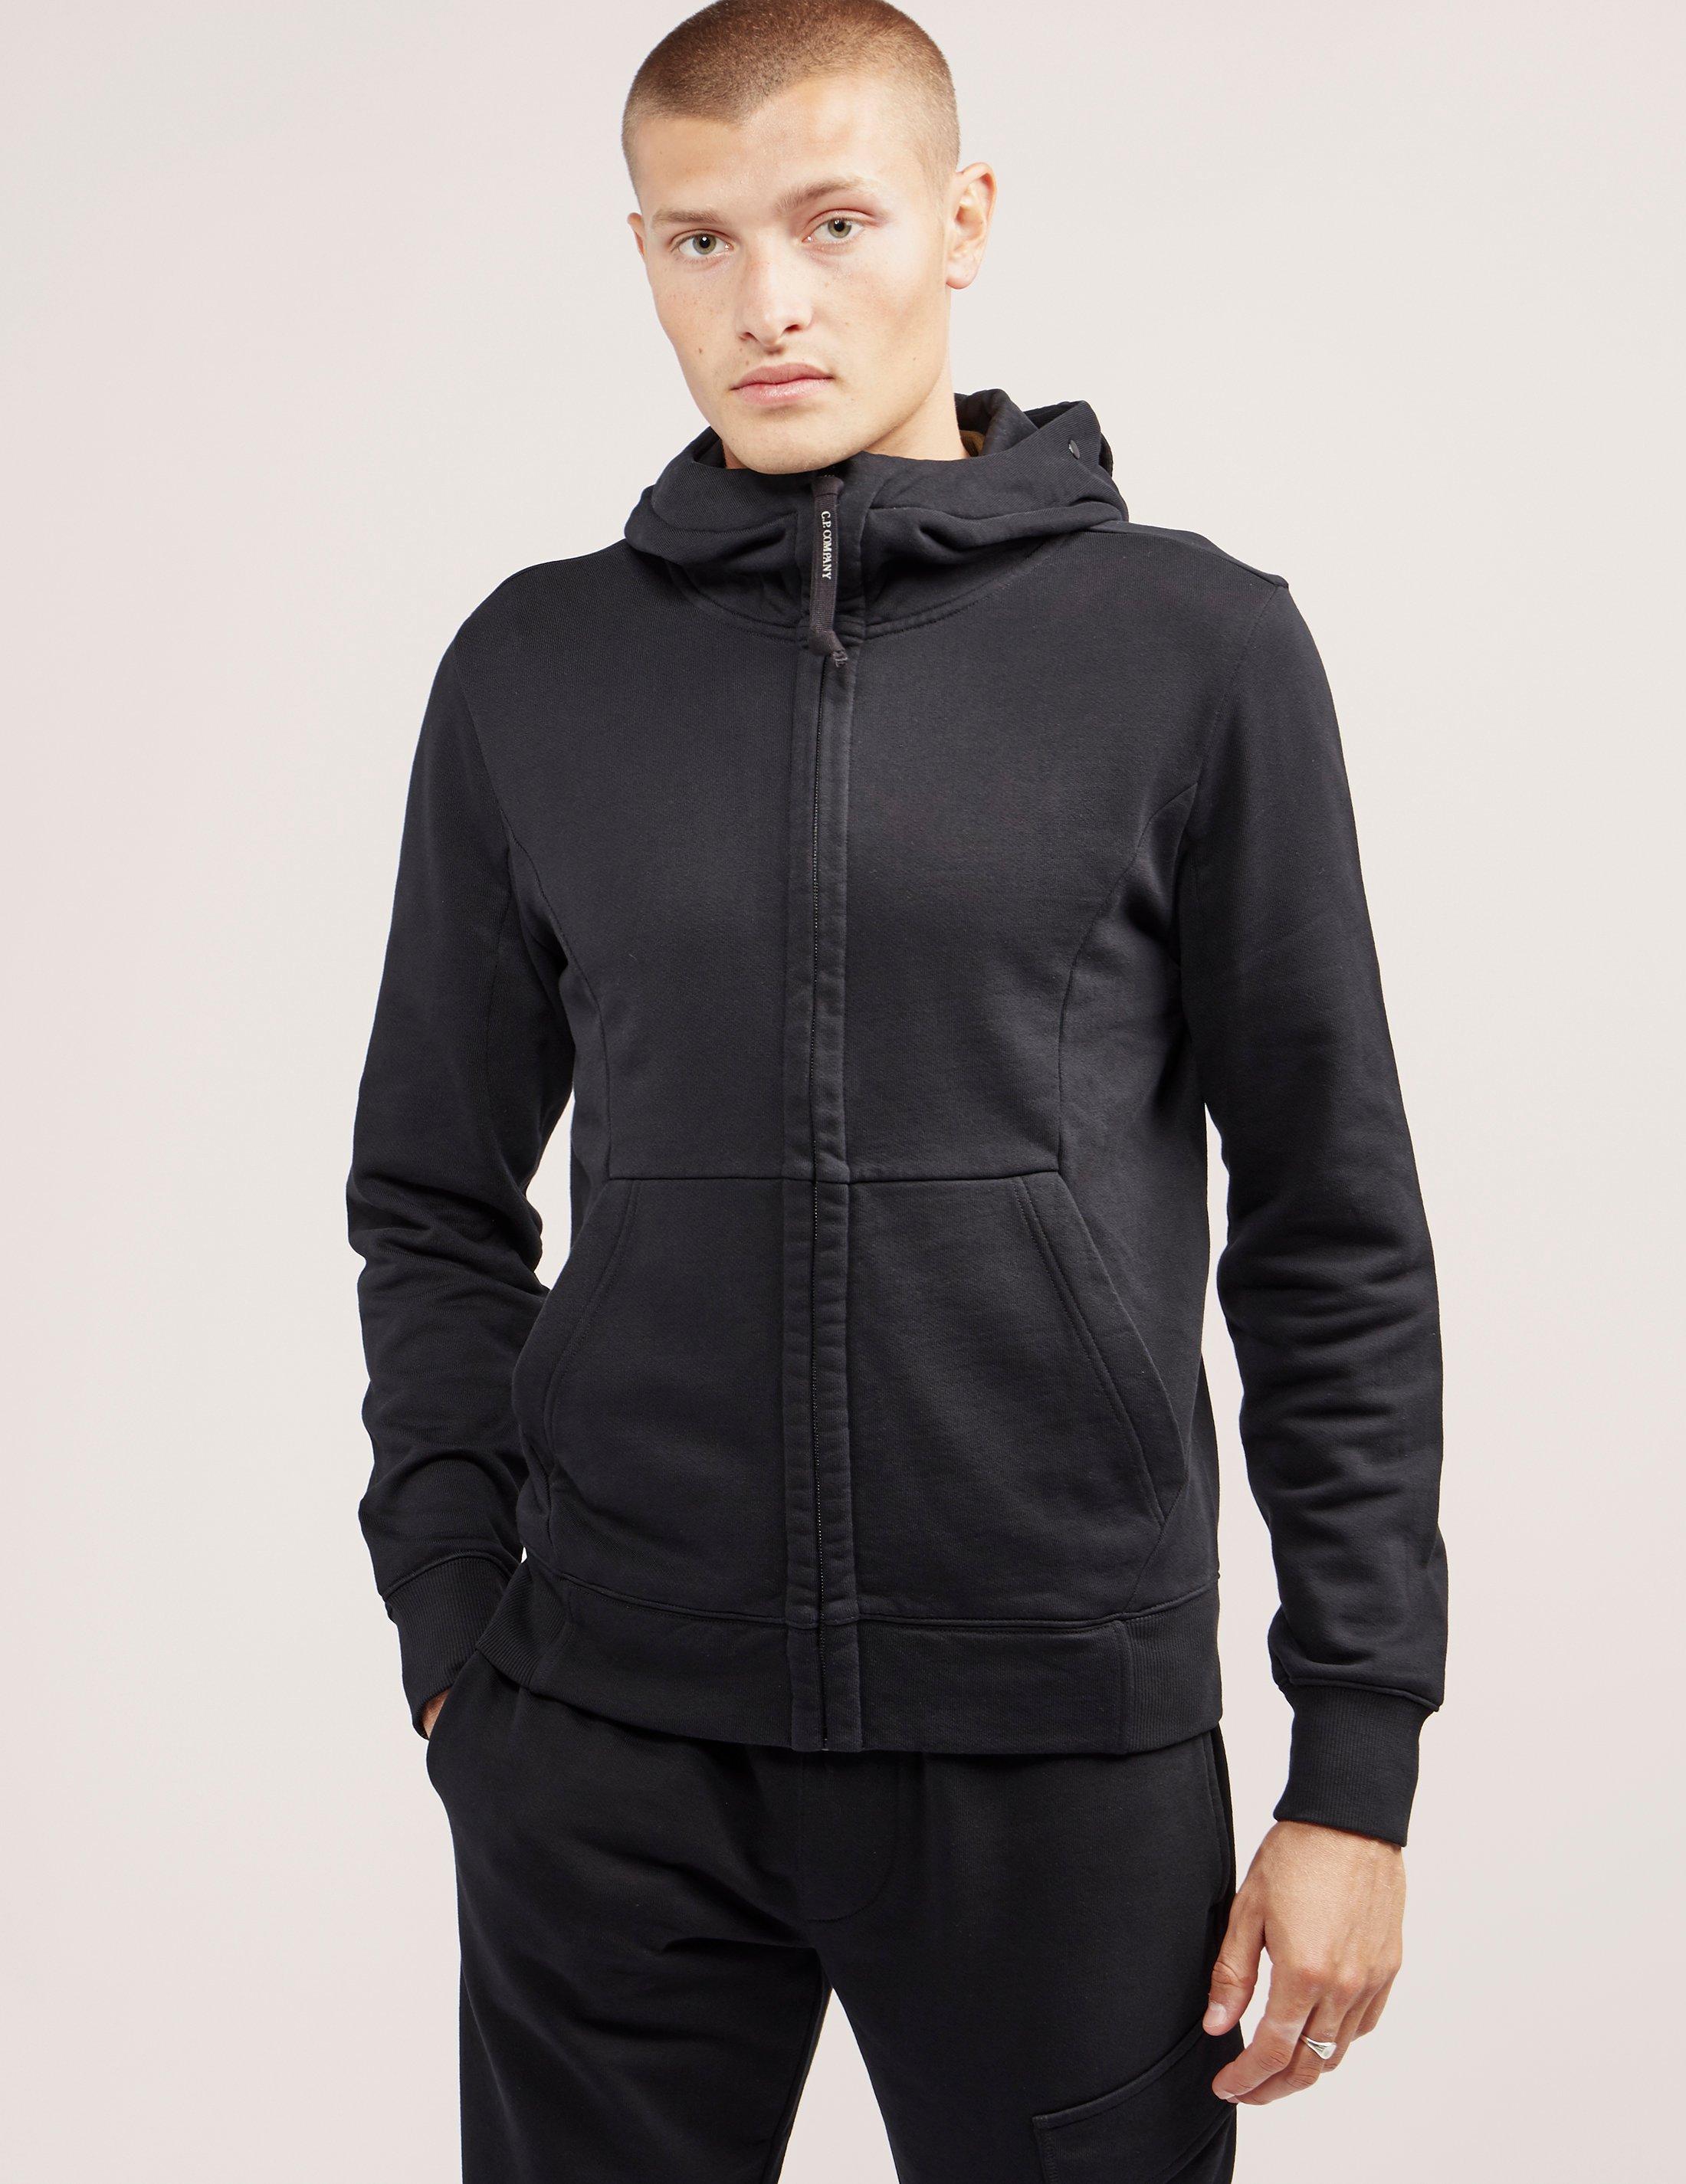 C.P. Company Goggle Full Zip Hoodie in Black for Men - Lyst